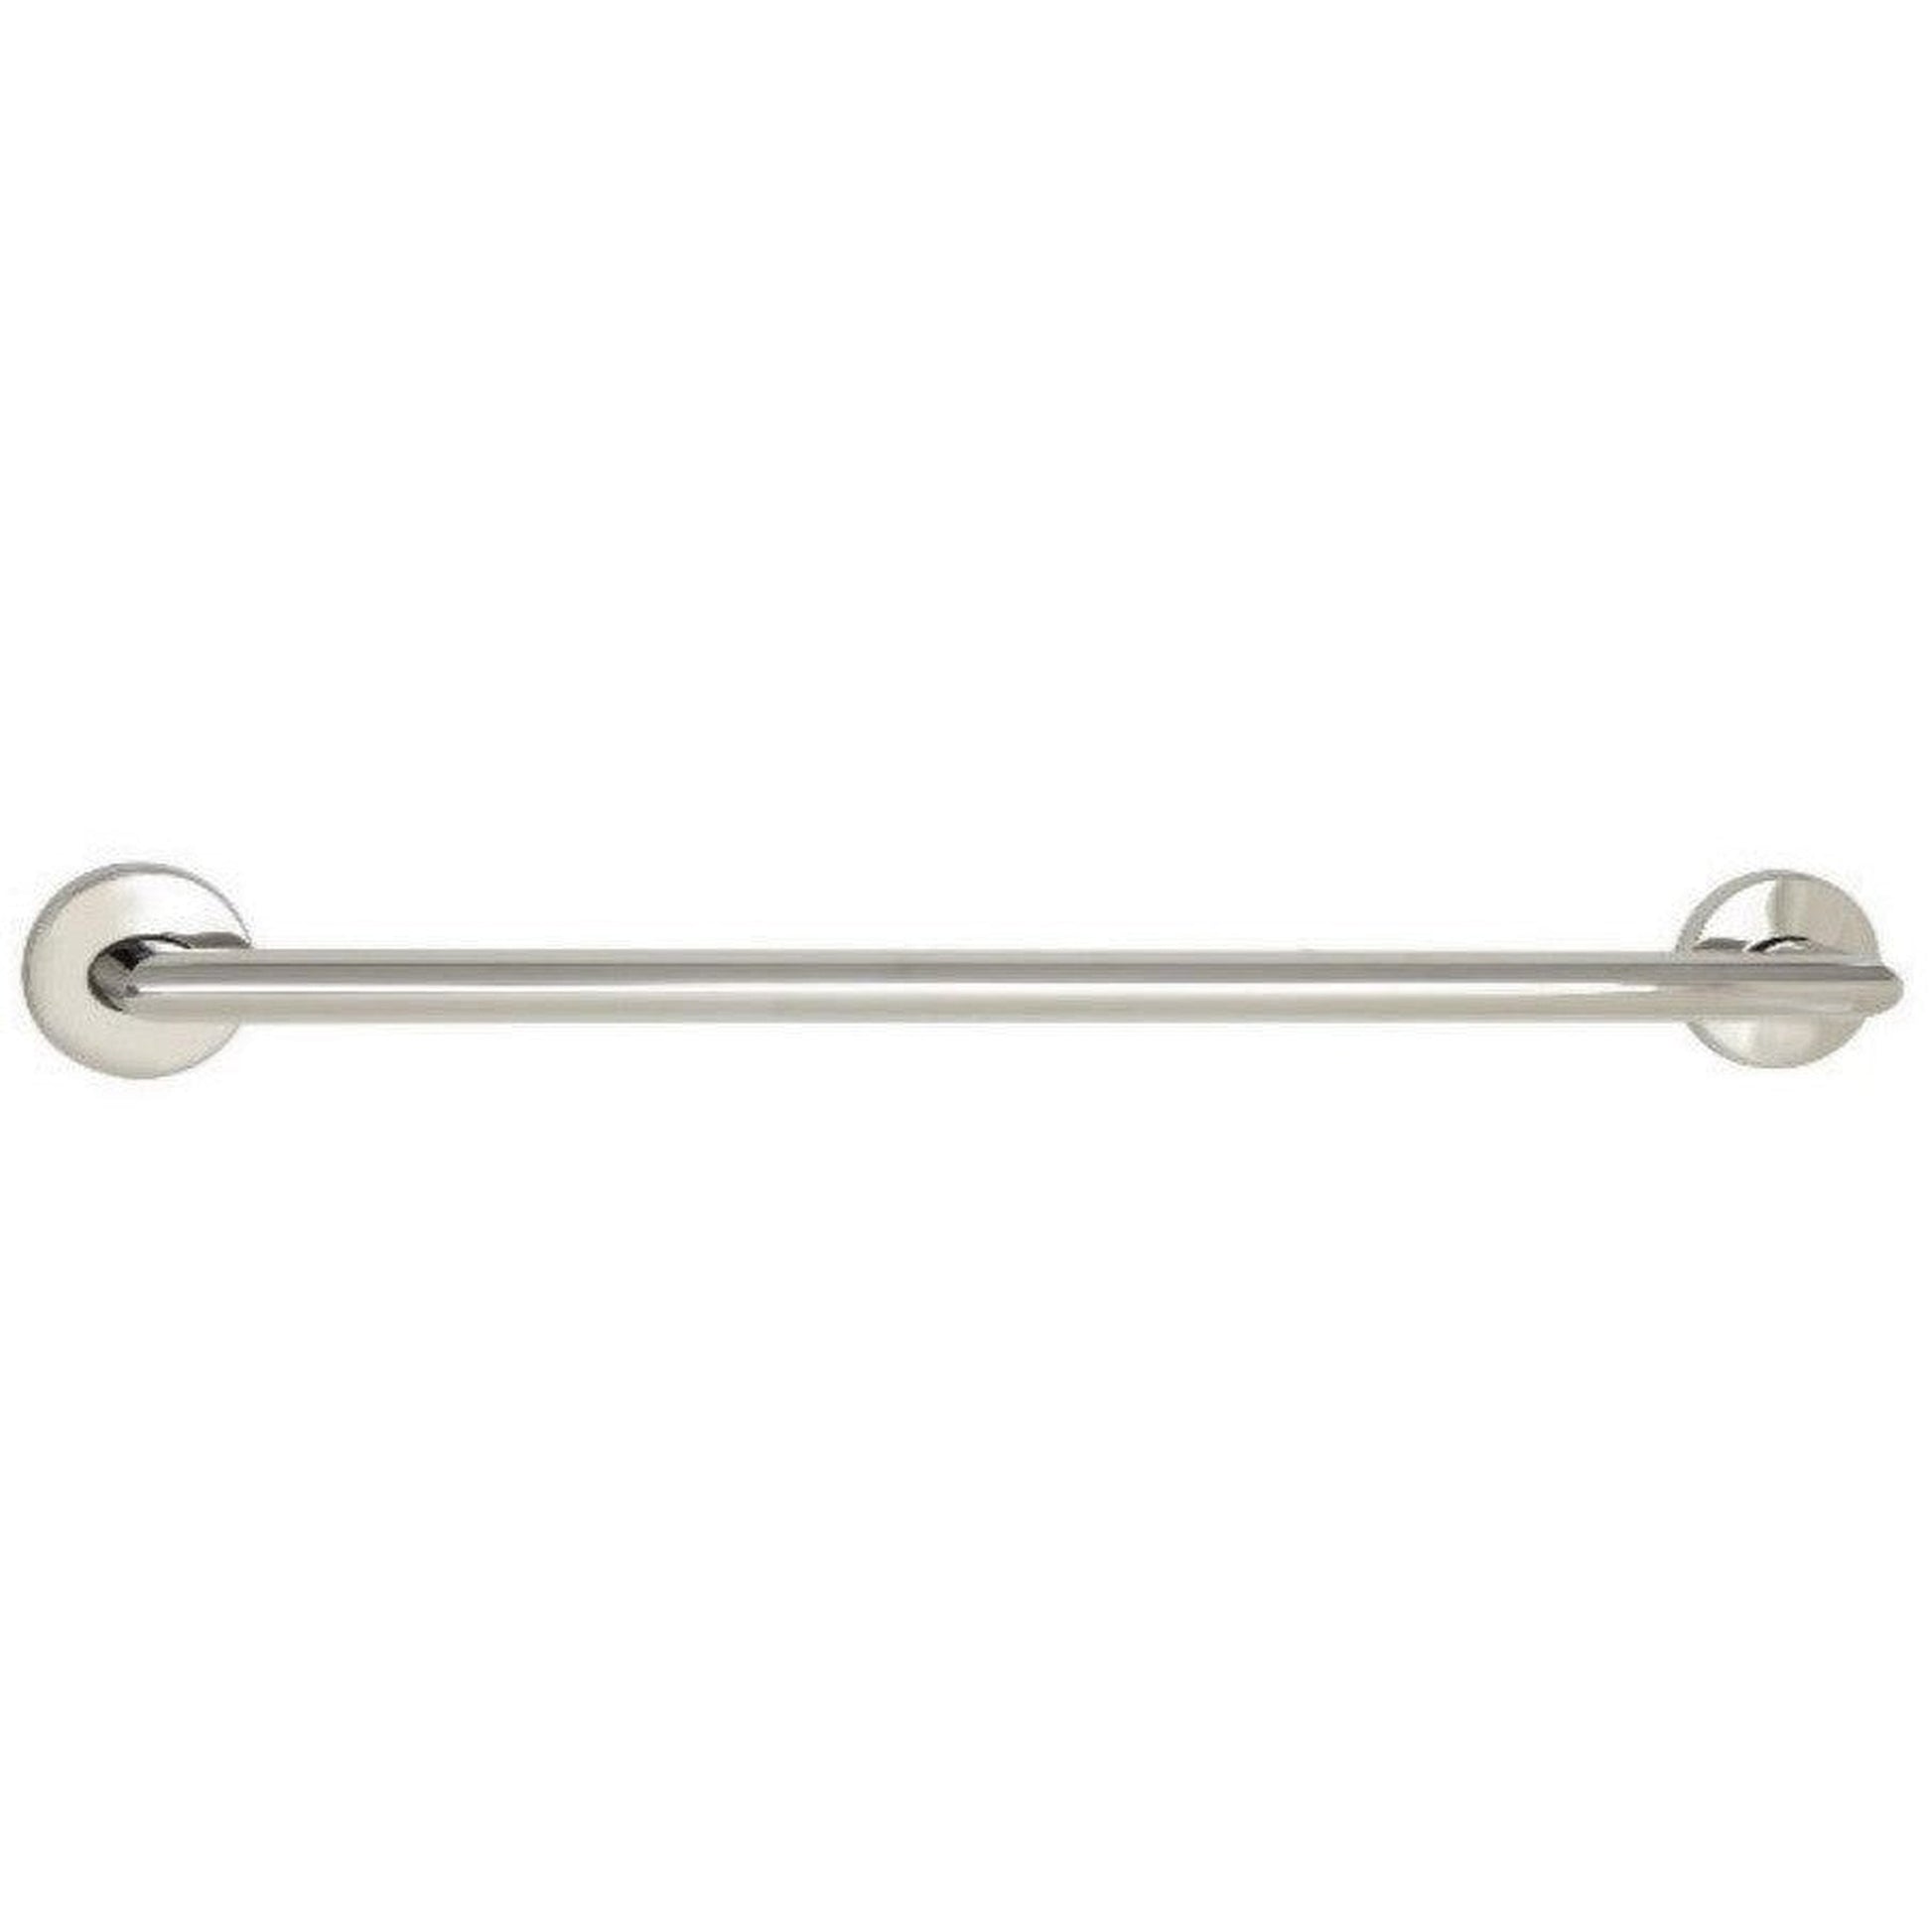 Seachrome Coronado 24" Polished Satinless Steel 1.5" Concealed Flanges Oval Grab Bar With Mitered Corners